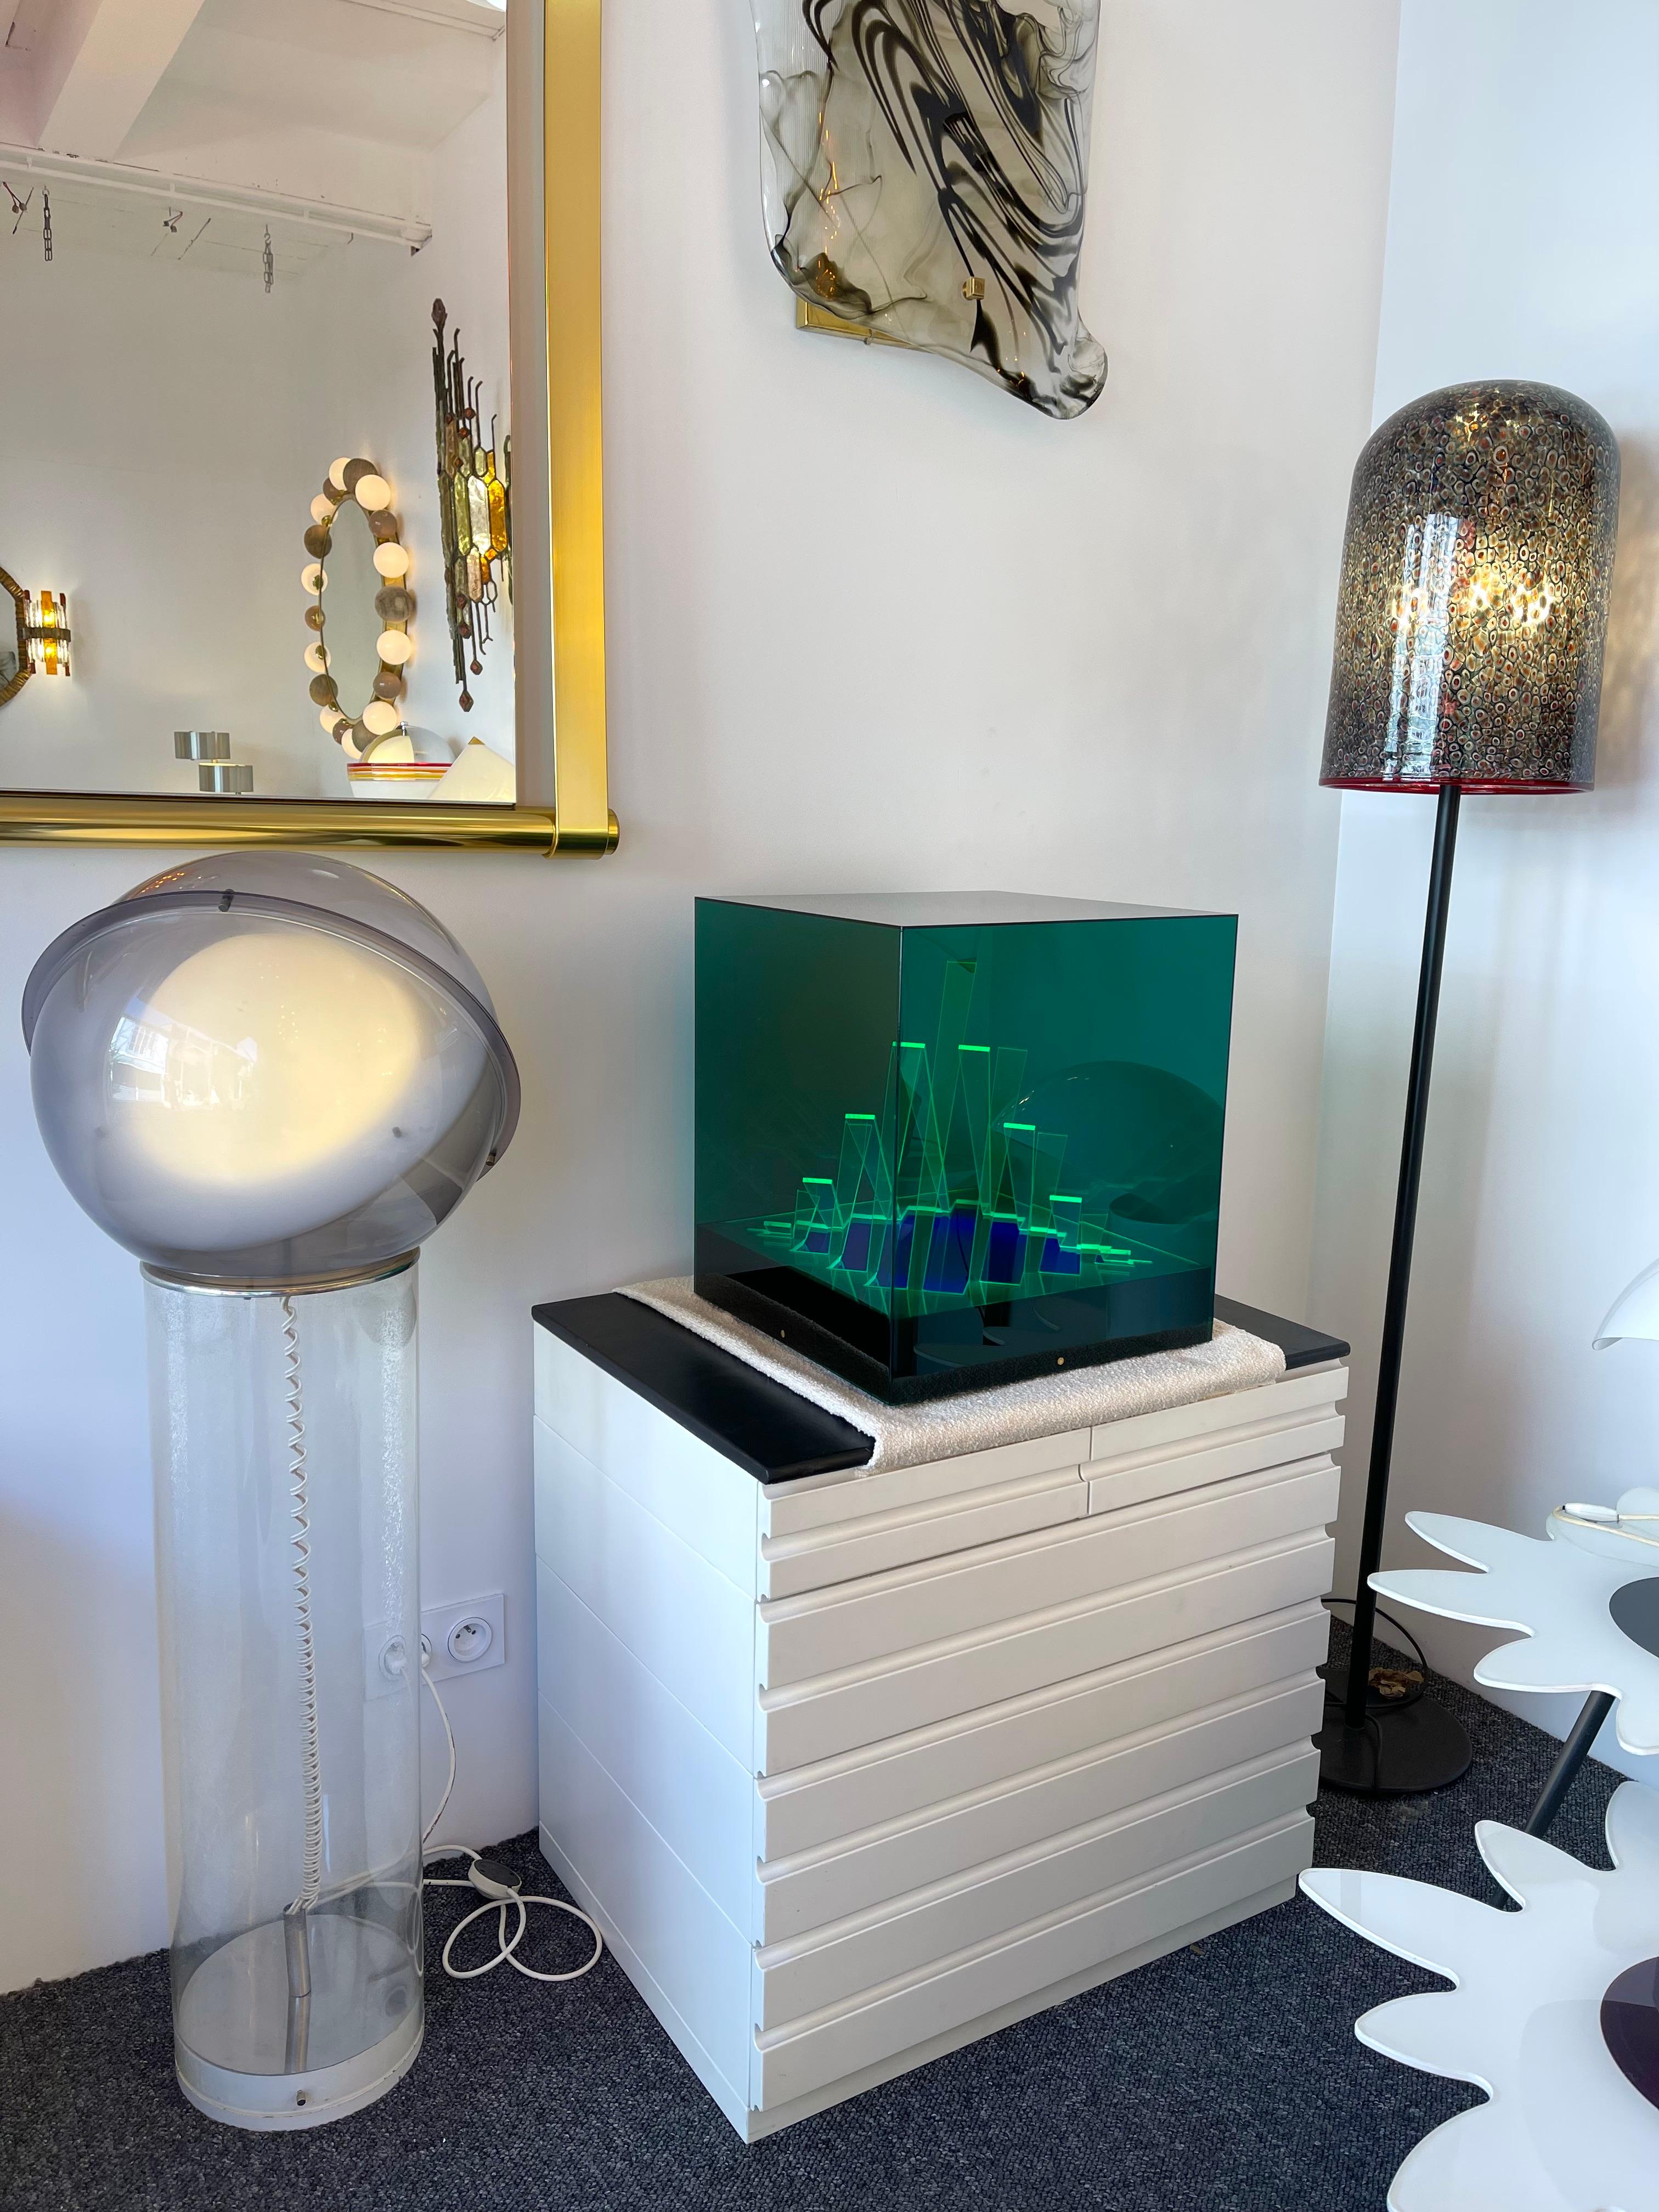 Mid-Century Modern Space Age Iluminated cube sculpture table bedside or floor lamp light cinetic work Cubo di Teo designed by James Riviere during the 1970's and edited by Centro Ricerche di Arte Industria Lissone, Italy. Colored acrylic plexiglass